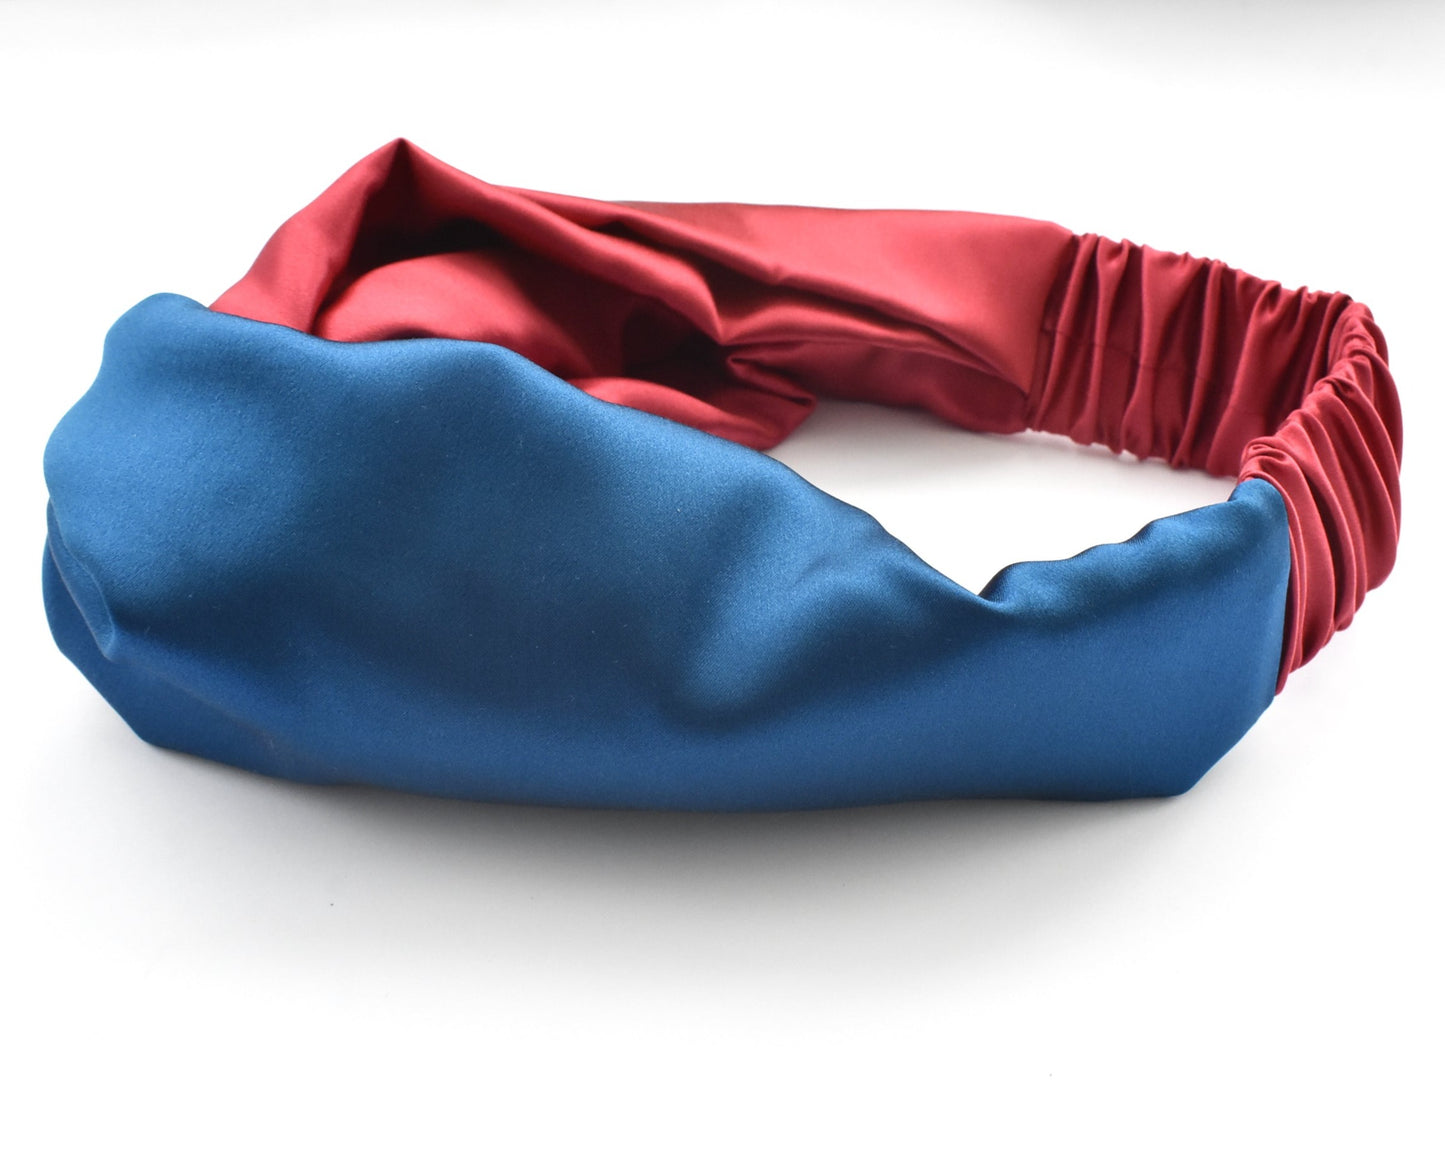 Blue & Red Split Twisted Turban hairband and neck scarf in Mulberry Silk - 100% pure silk satin